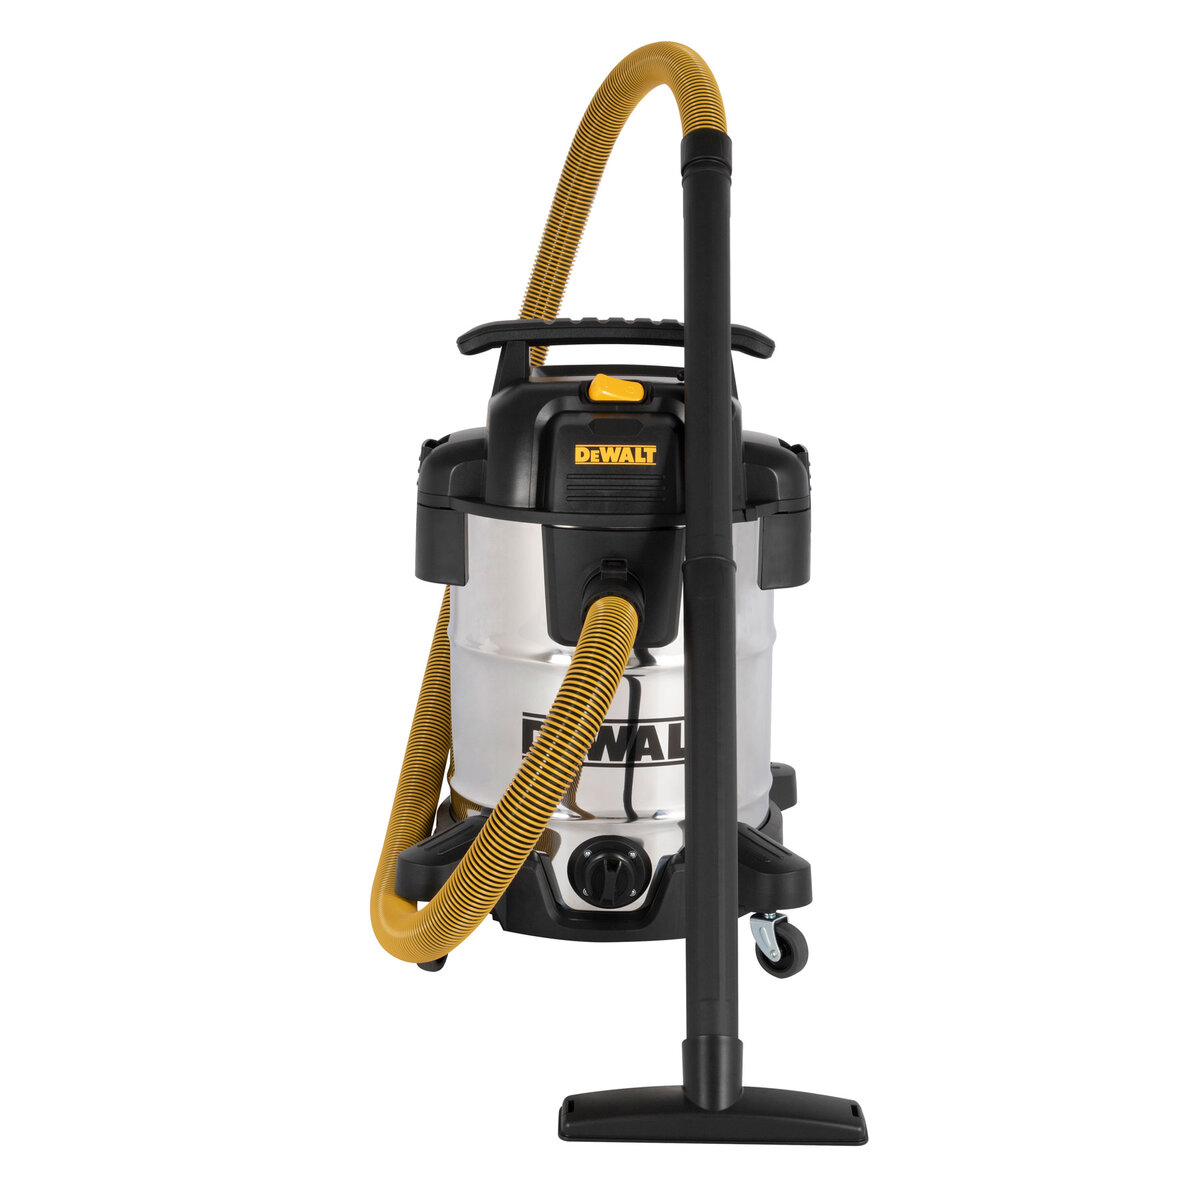 Cut out image of dewalt wet and dry vac